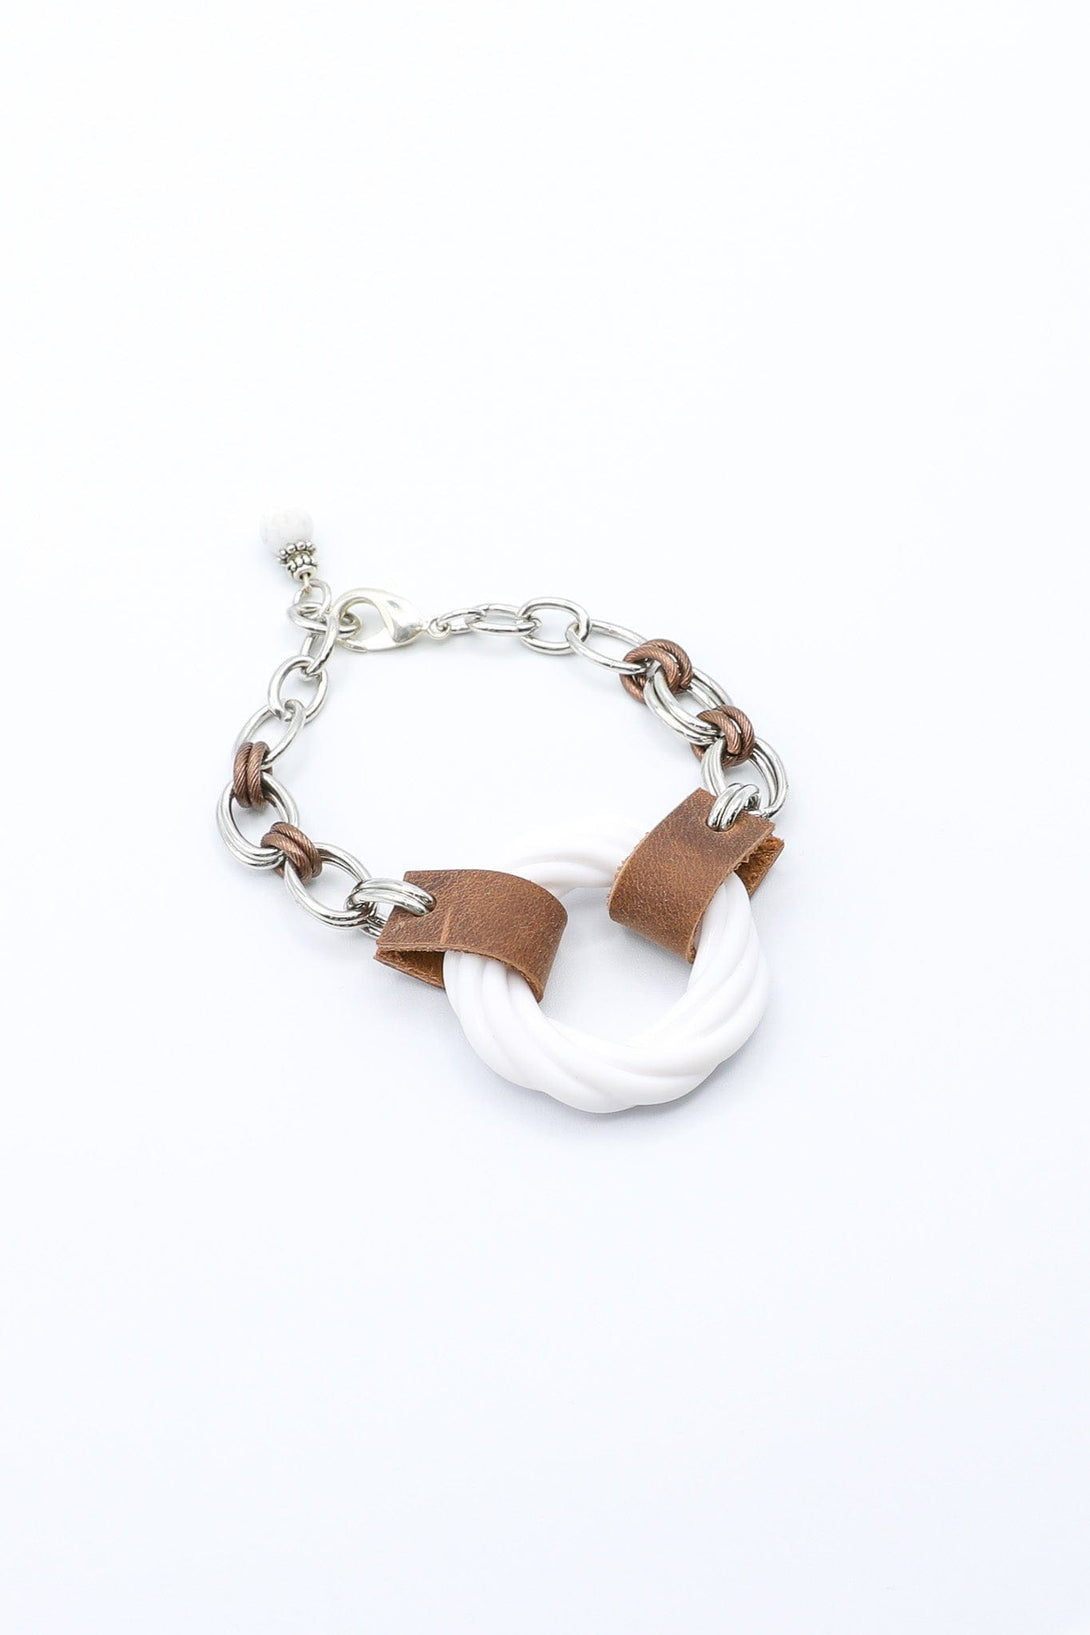 Bracelet with Leather and White Vintage Connector Ring